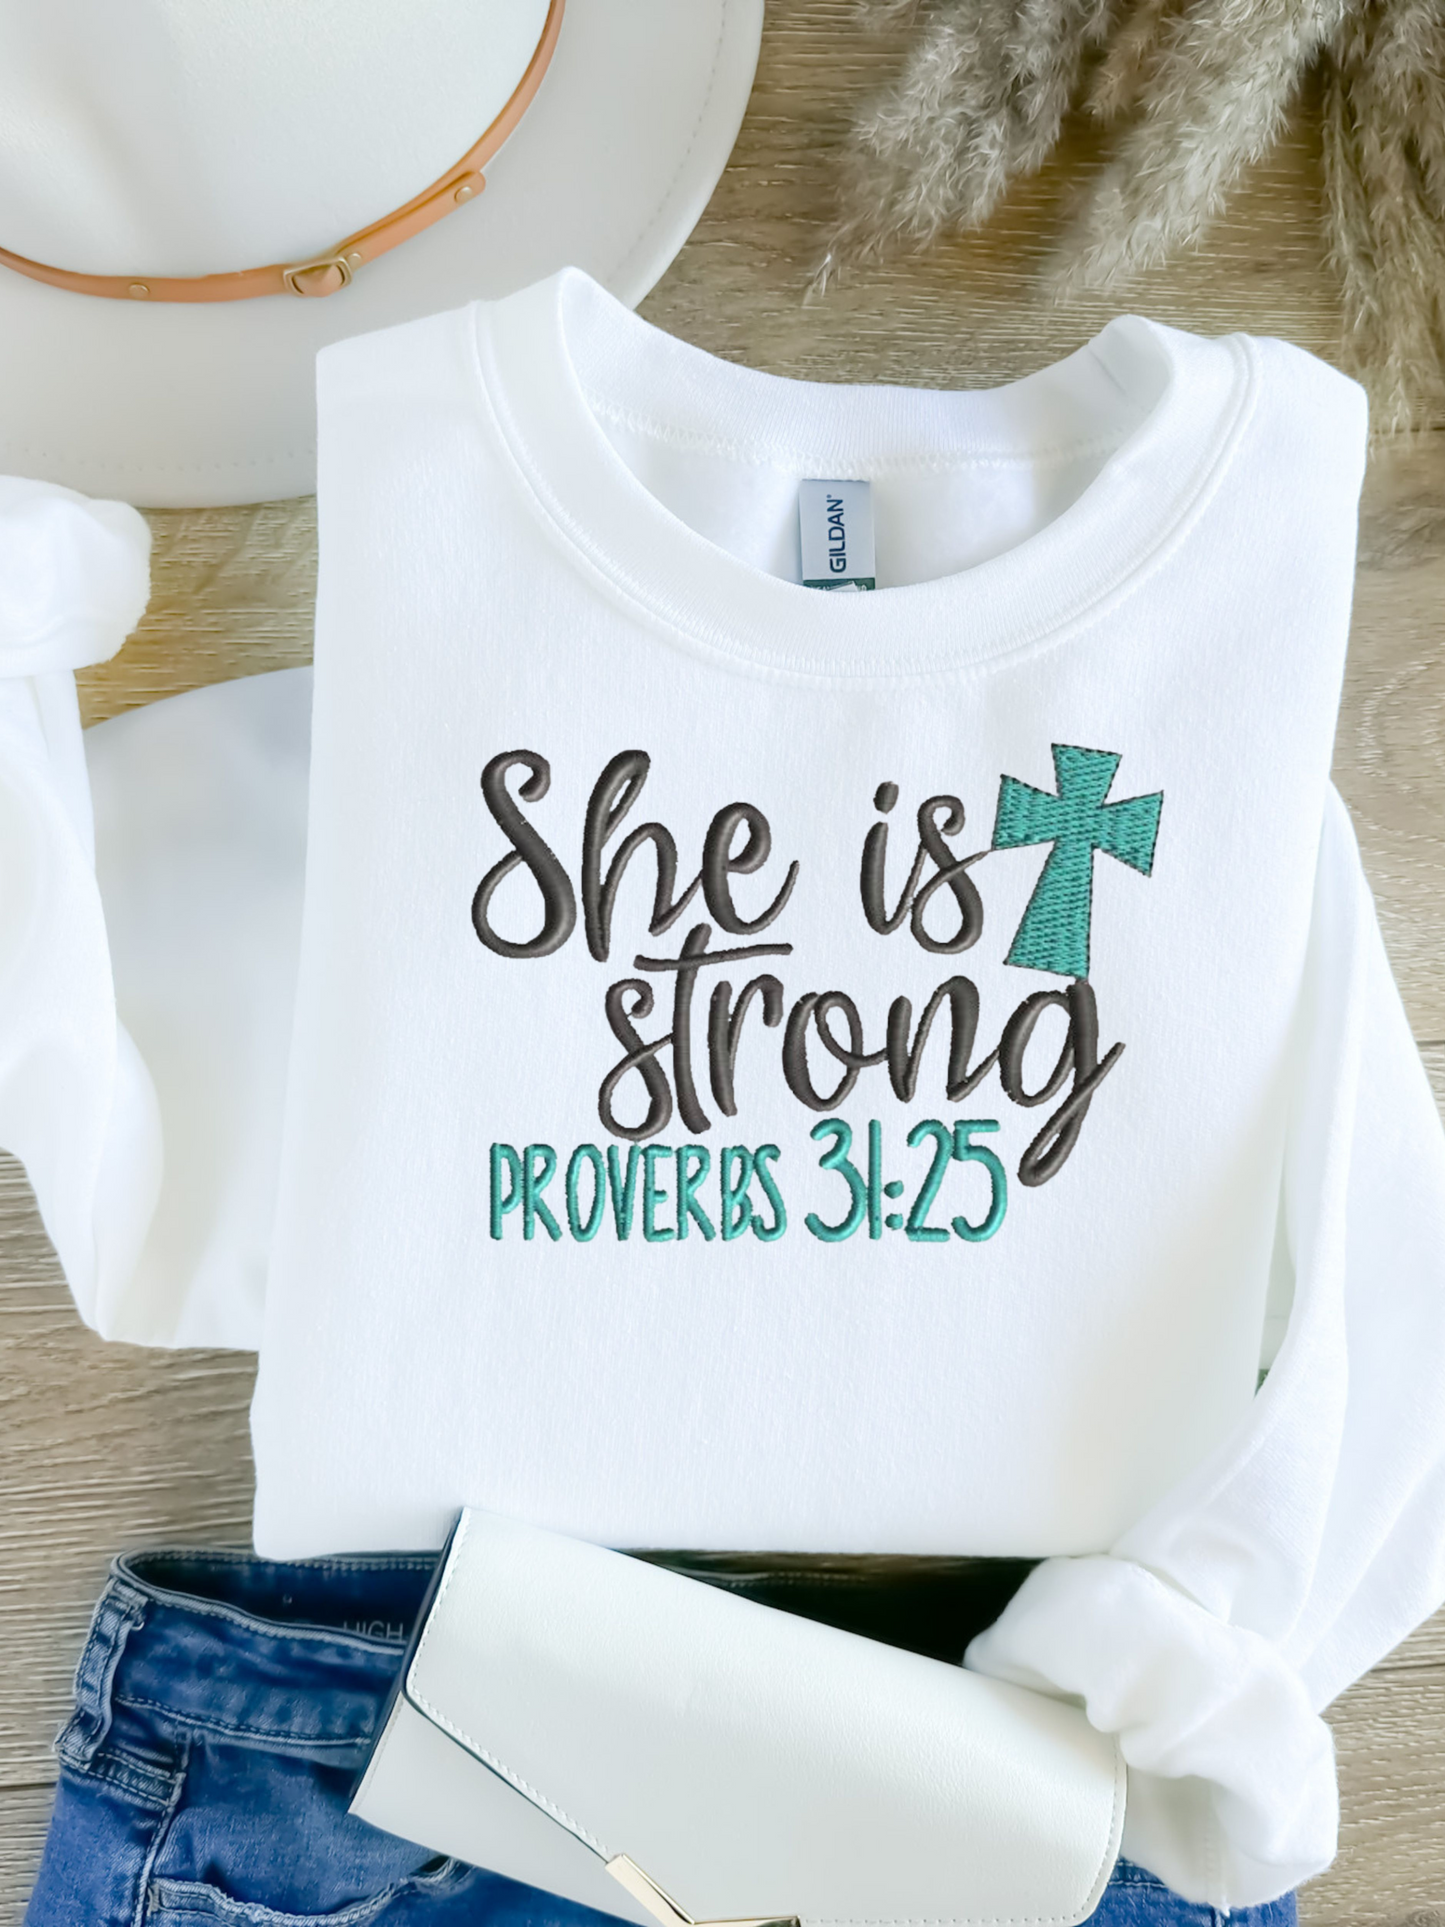 She Is Strong, Proverbs 31 Woman, Cross Sweatshirt, Embroidered